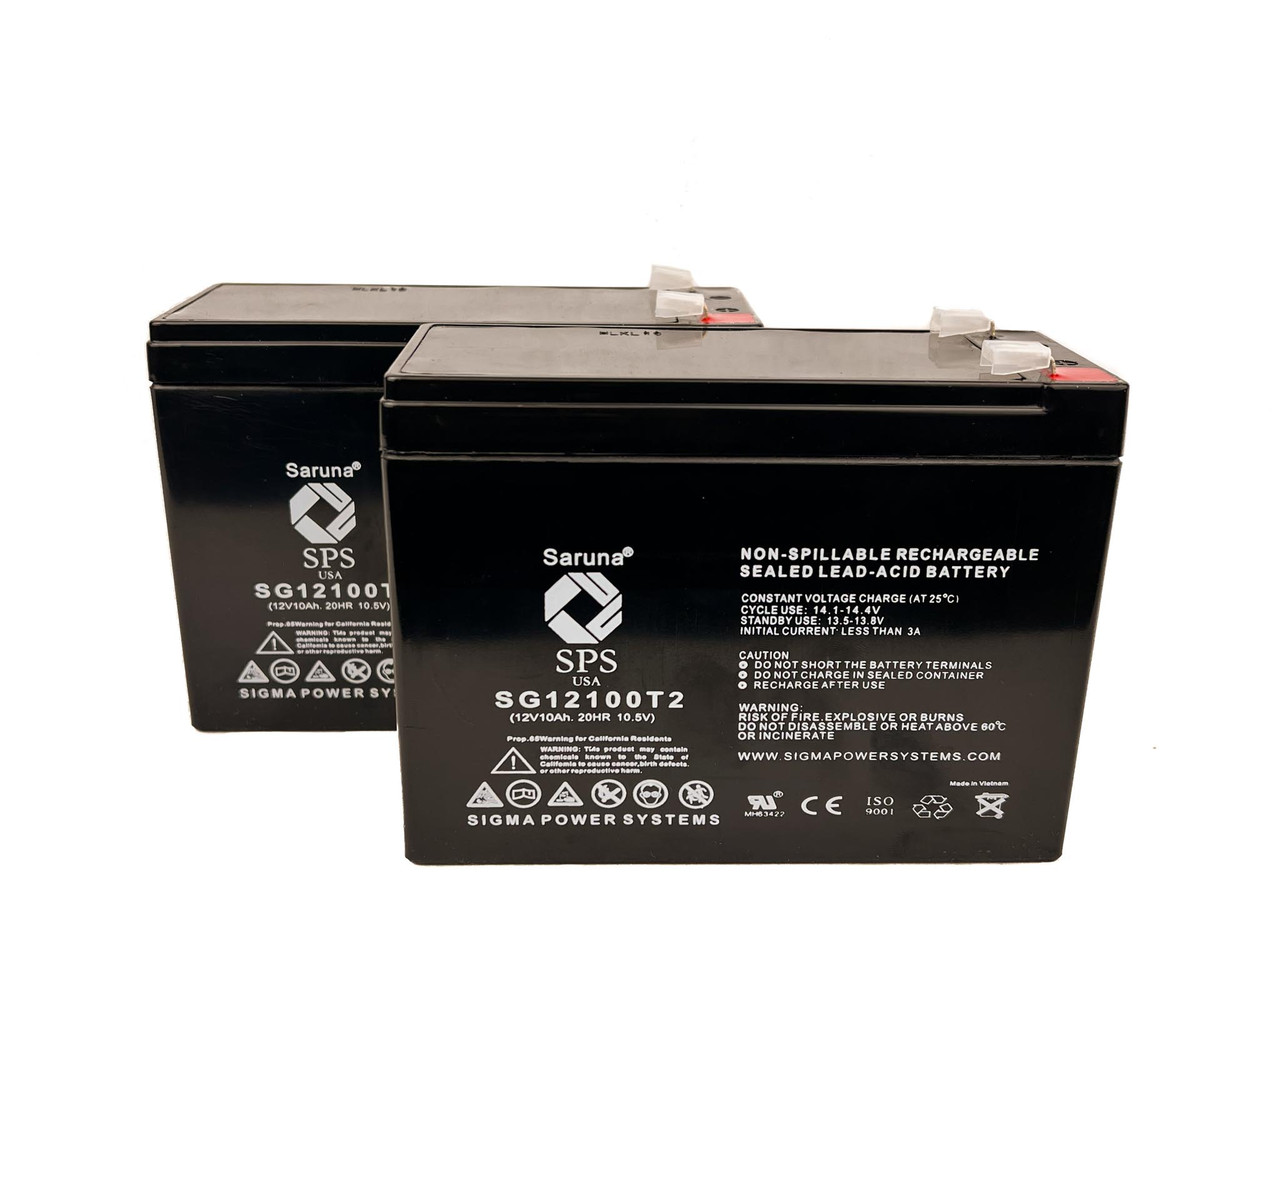 Raion Power 12V 10Ah Lead Acid Replacement Battery for Duracell DURA12-10F2 - 2 Pack